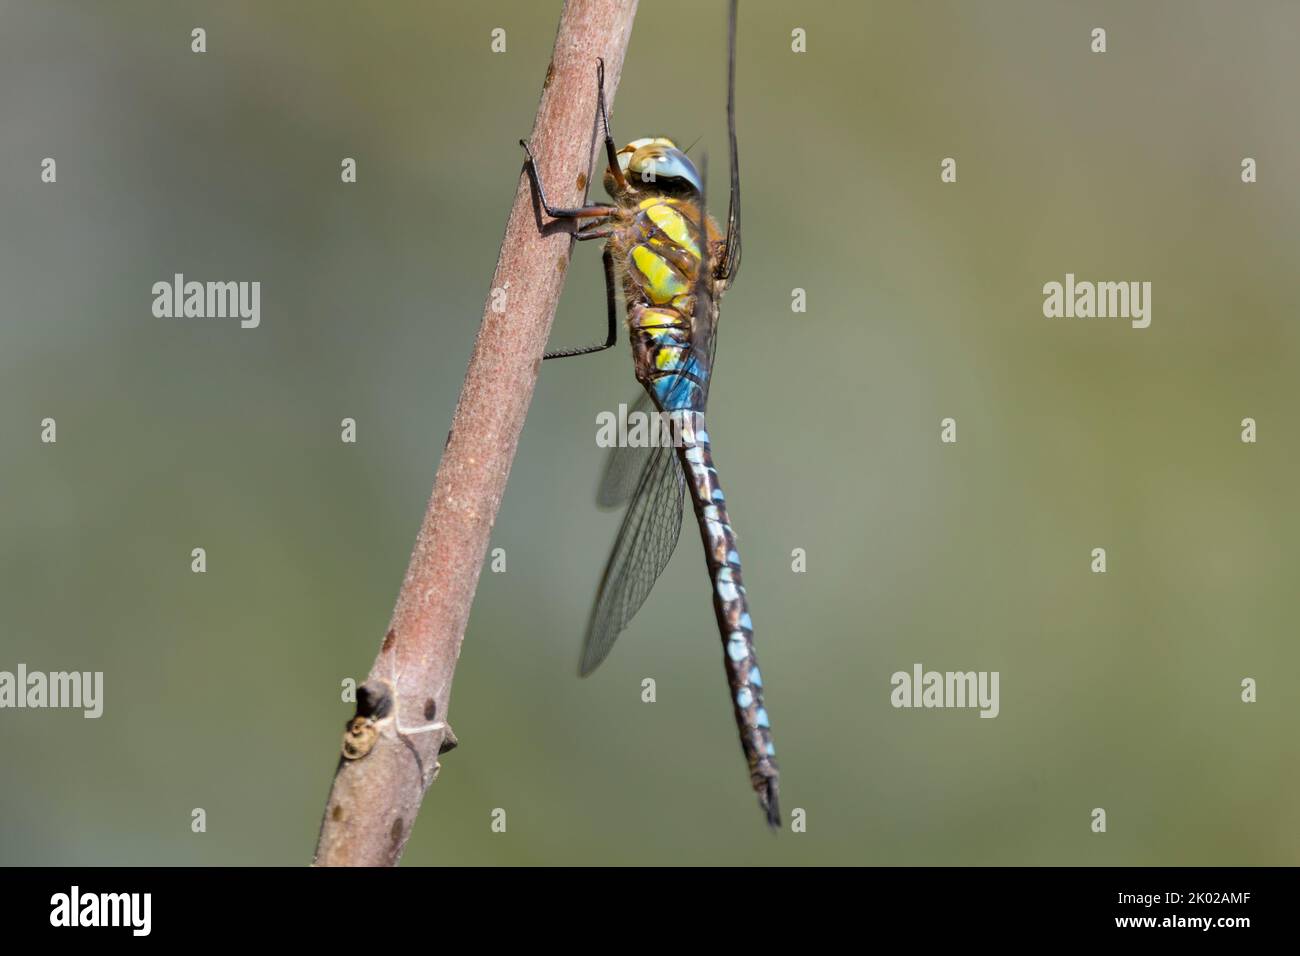 Large dragonfly yellow green and brown striped thorax blue and black bands on long abdomen dark dash marking on dark forewings and blue compound eyes Stock Photo